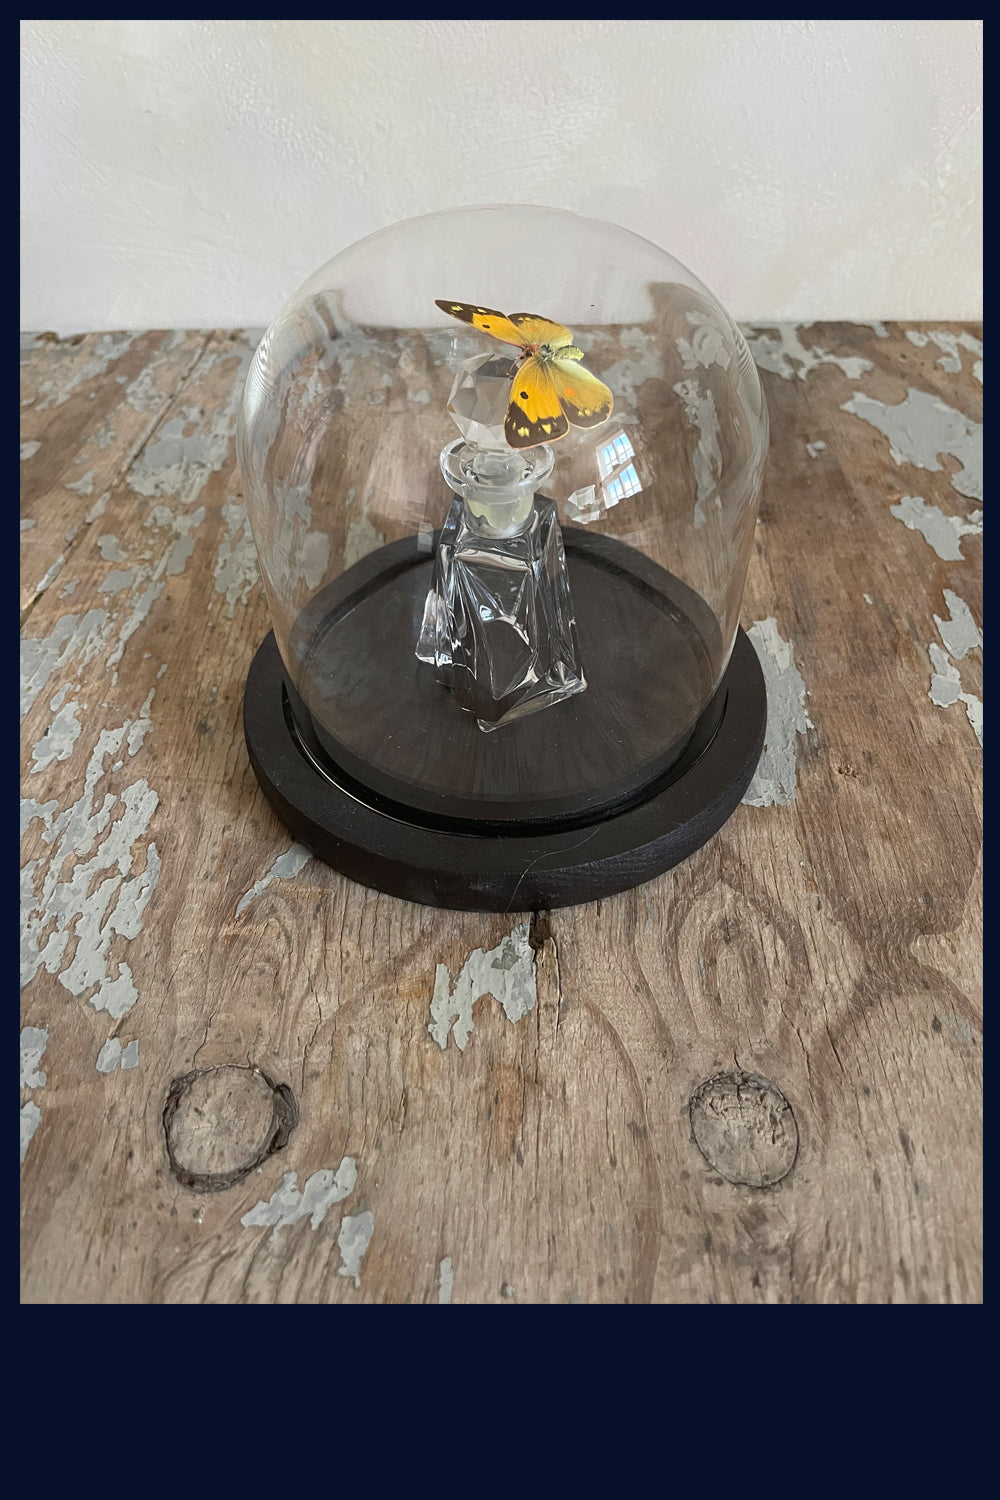 Enigma Variations Collection: Vintage Crystal Perfume Bottle with a Vintage Butterfly in a Glass Display Dome